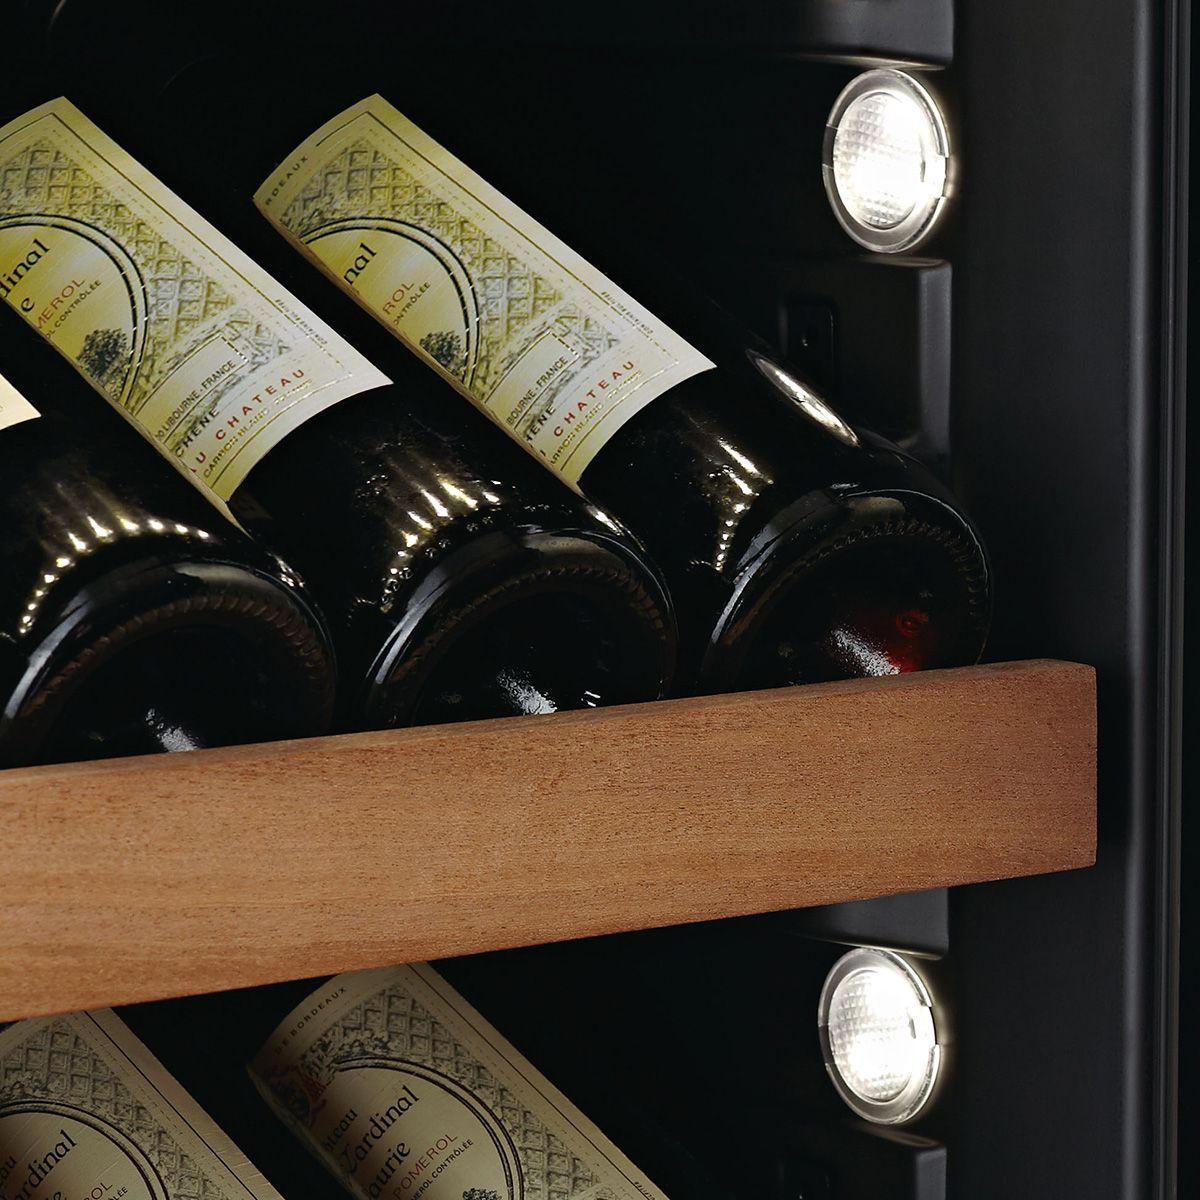 Swisscave WLB-460DFLD - Black Edition Dual Zone Wine Cabinet with Gastro Furnishing (124-210 BOT) - 595mm Wide - winestorageuk